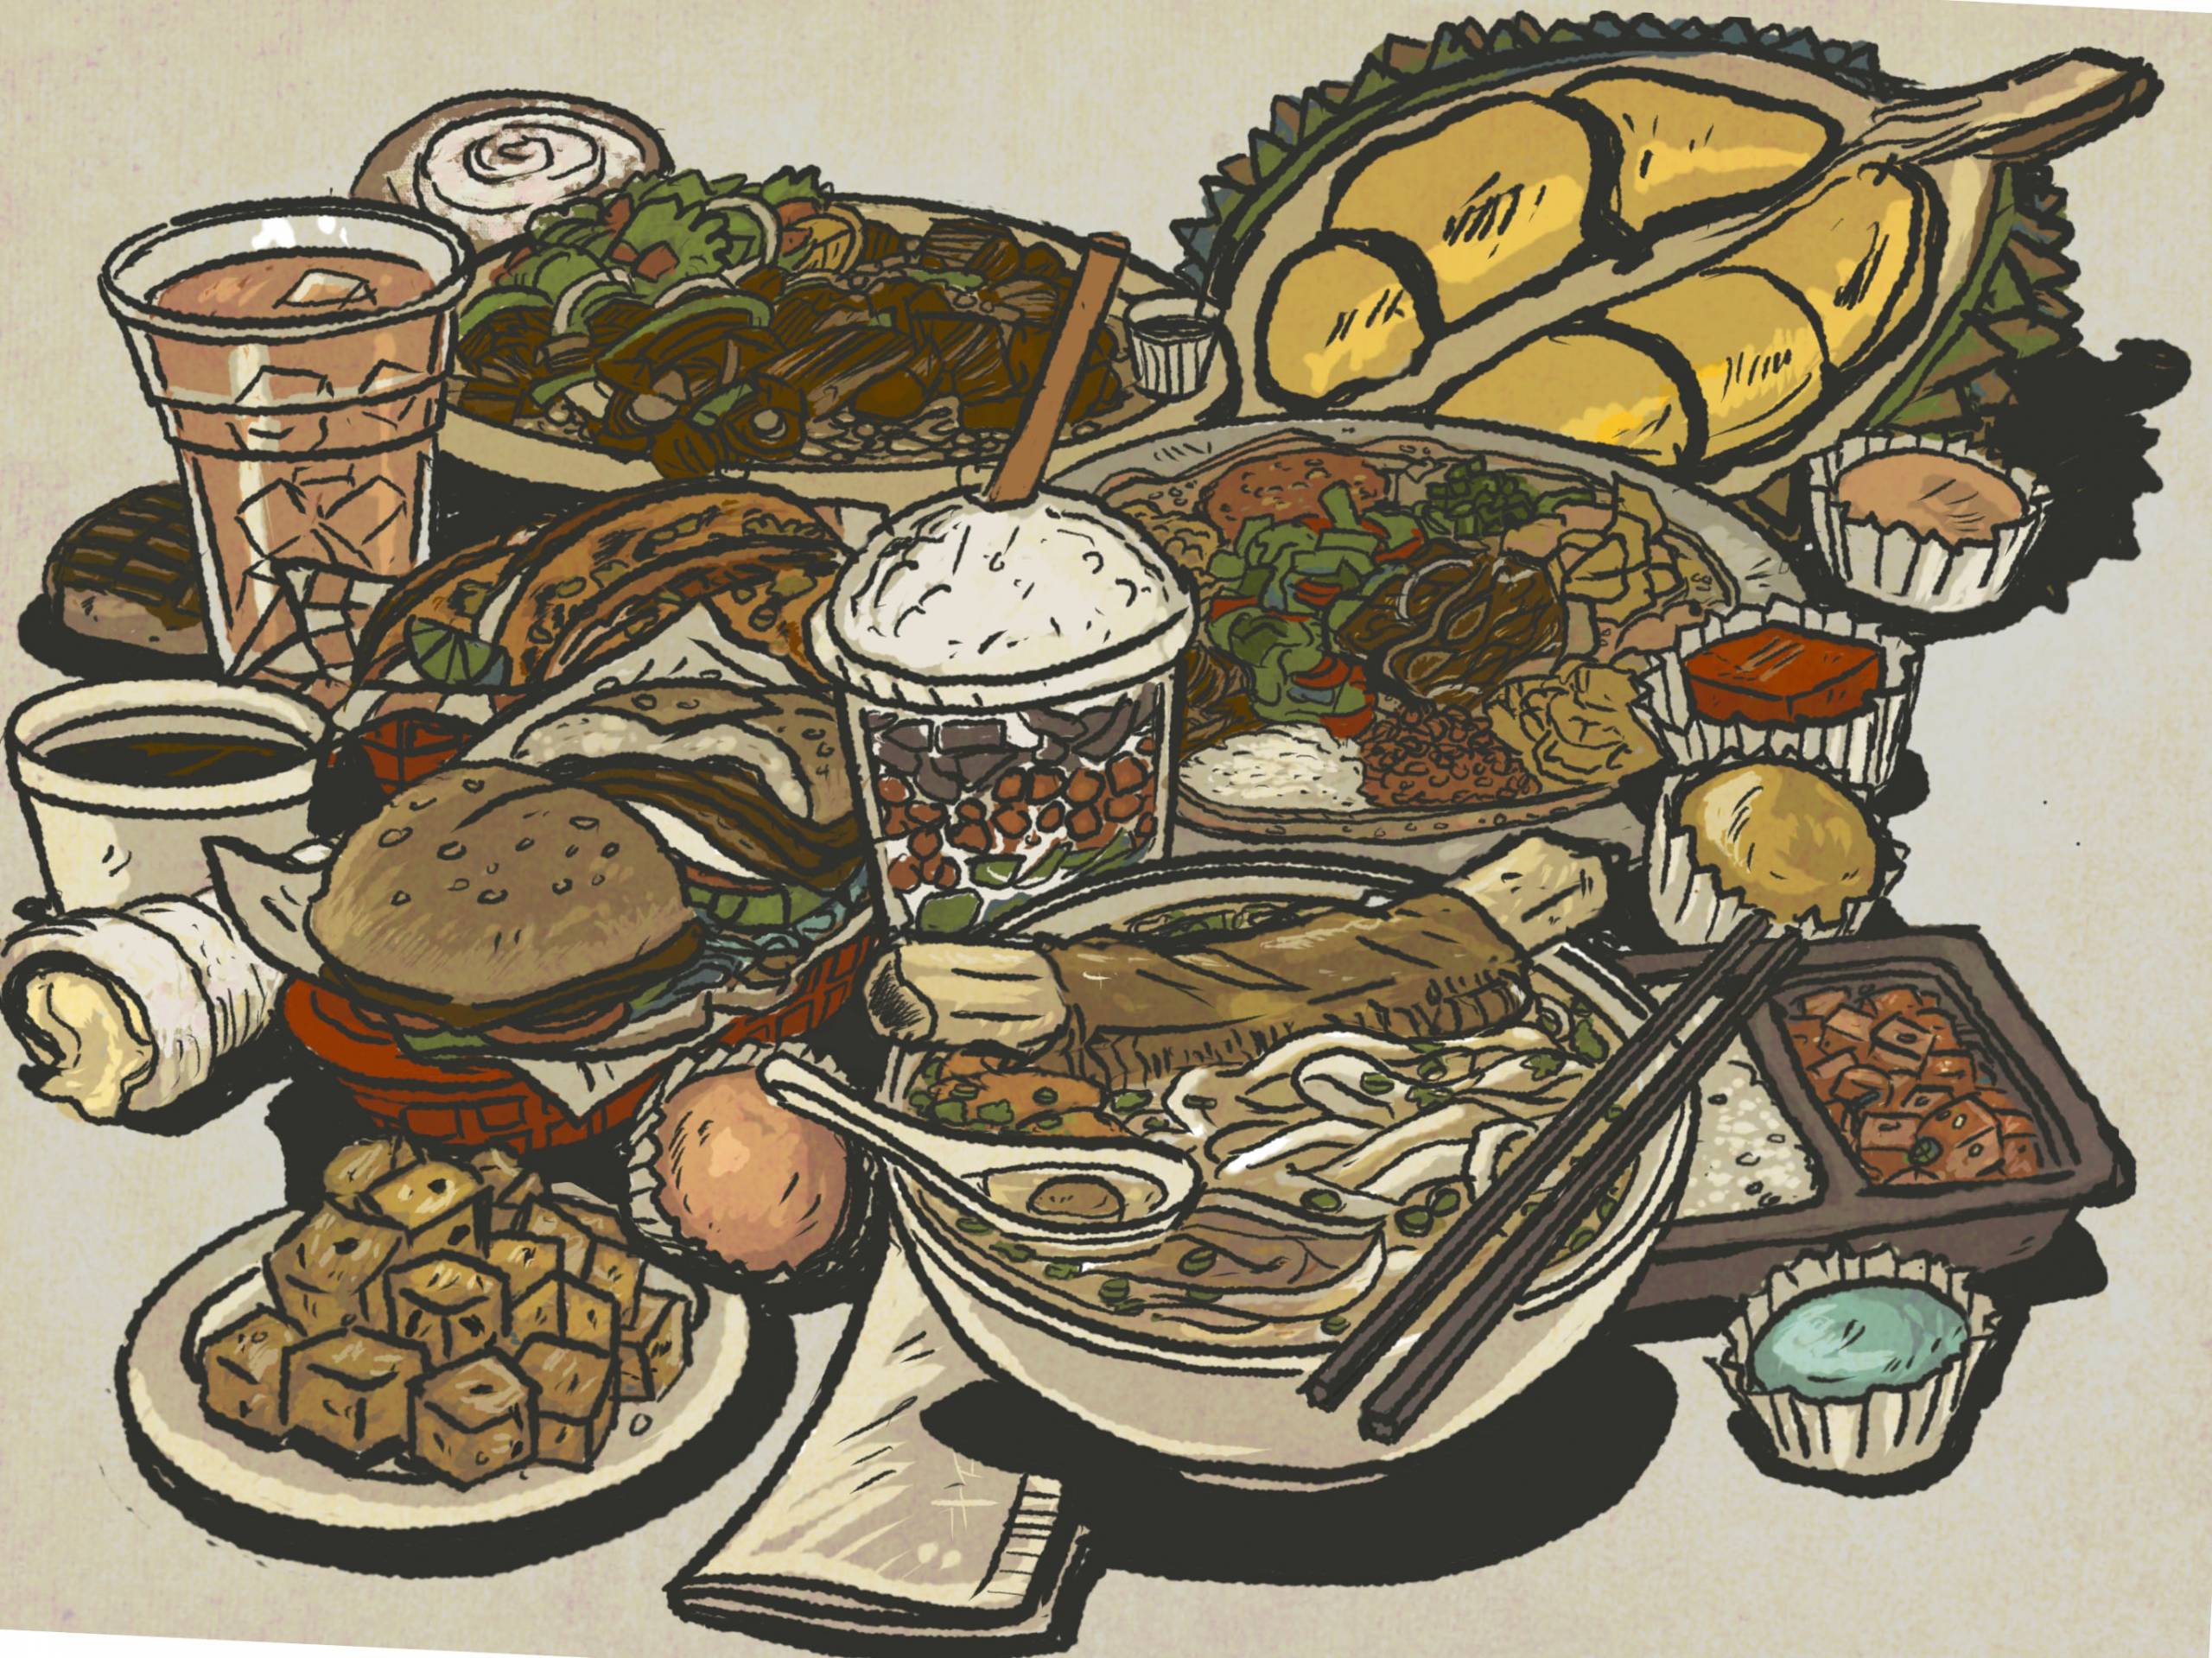 An illustration of a spread of various international foods: a bowl of pho, a torta, an Ethiopian veggie combo plate, the cross section of a durian and so forth.